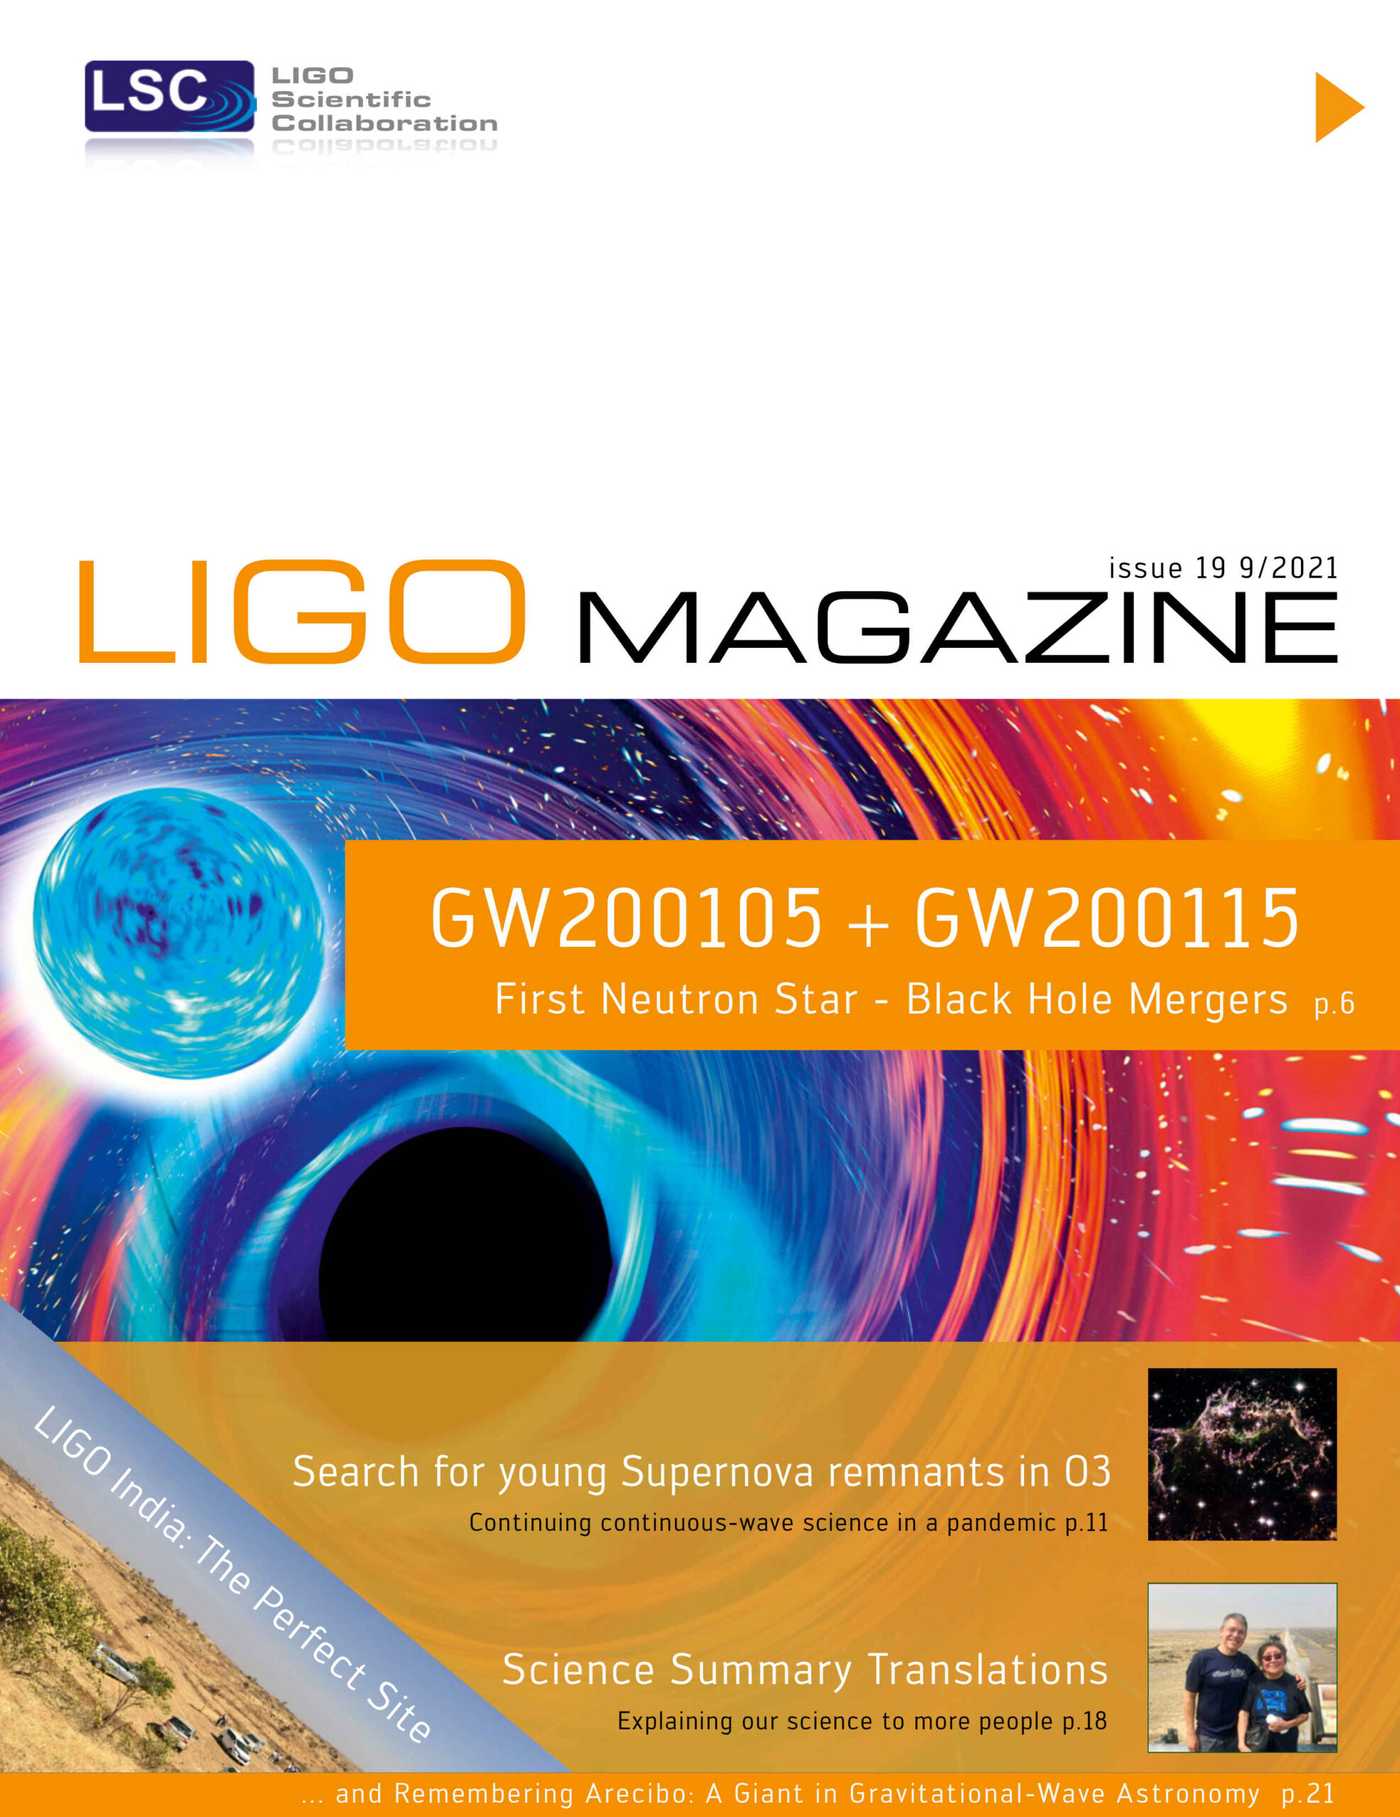 News-Image 18 of: New LIGO Magazine Issue 19 is out